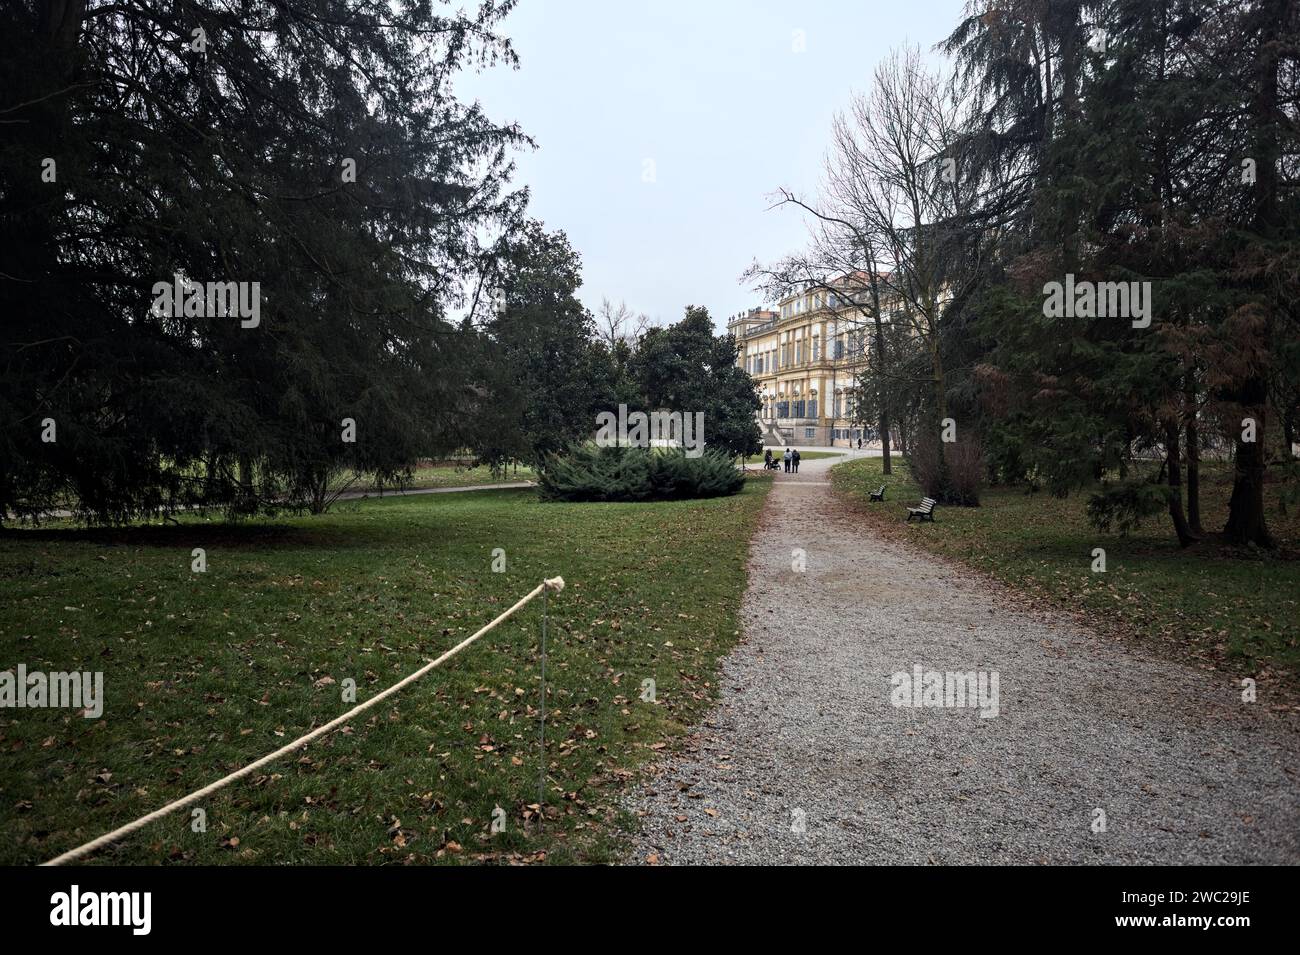 Mansion at the end of a path in a park on a cloudy day in autumn Stock Photo